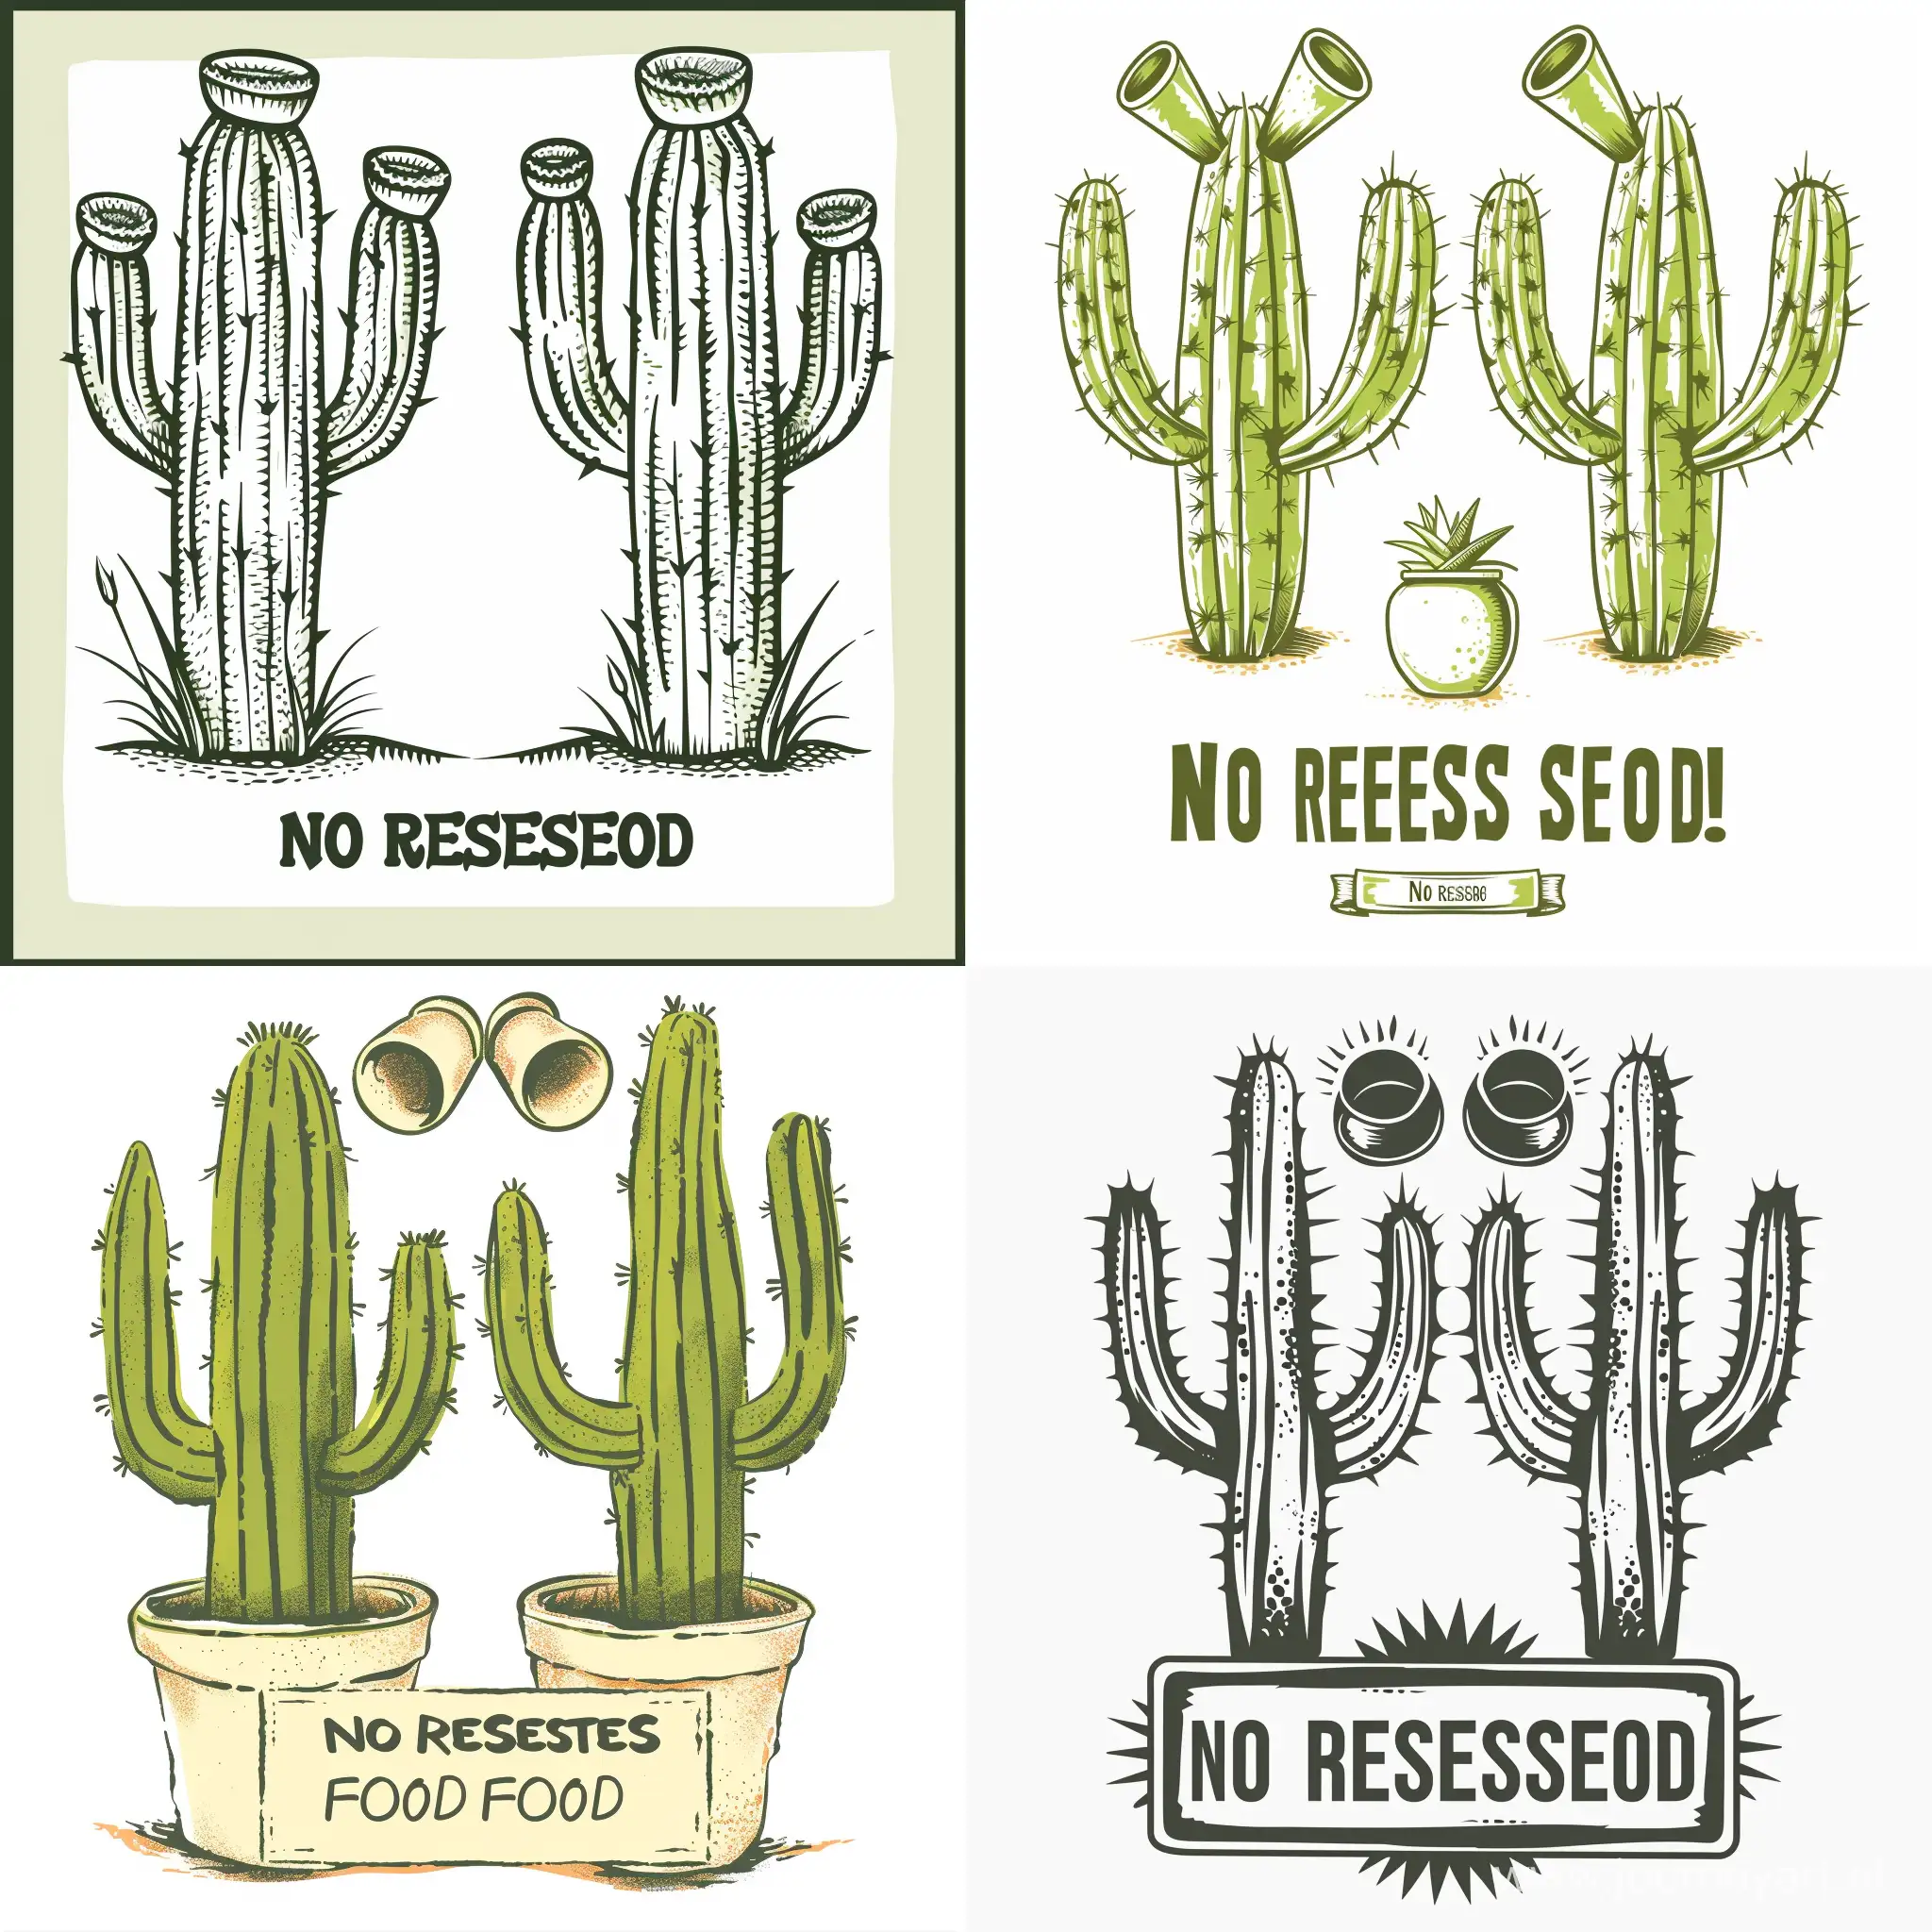 Create an image os two cactus with two coulds above then. Bellow the cactus write "No Results Found". Use white background and style as vector image.